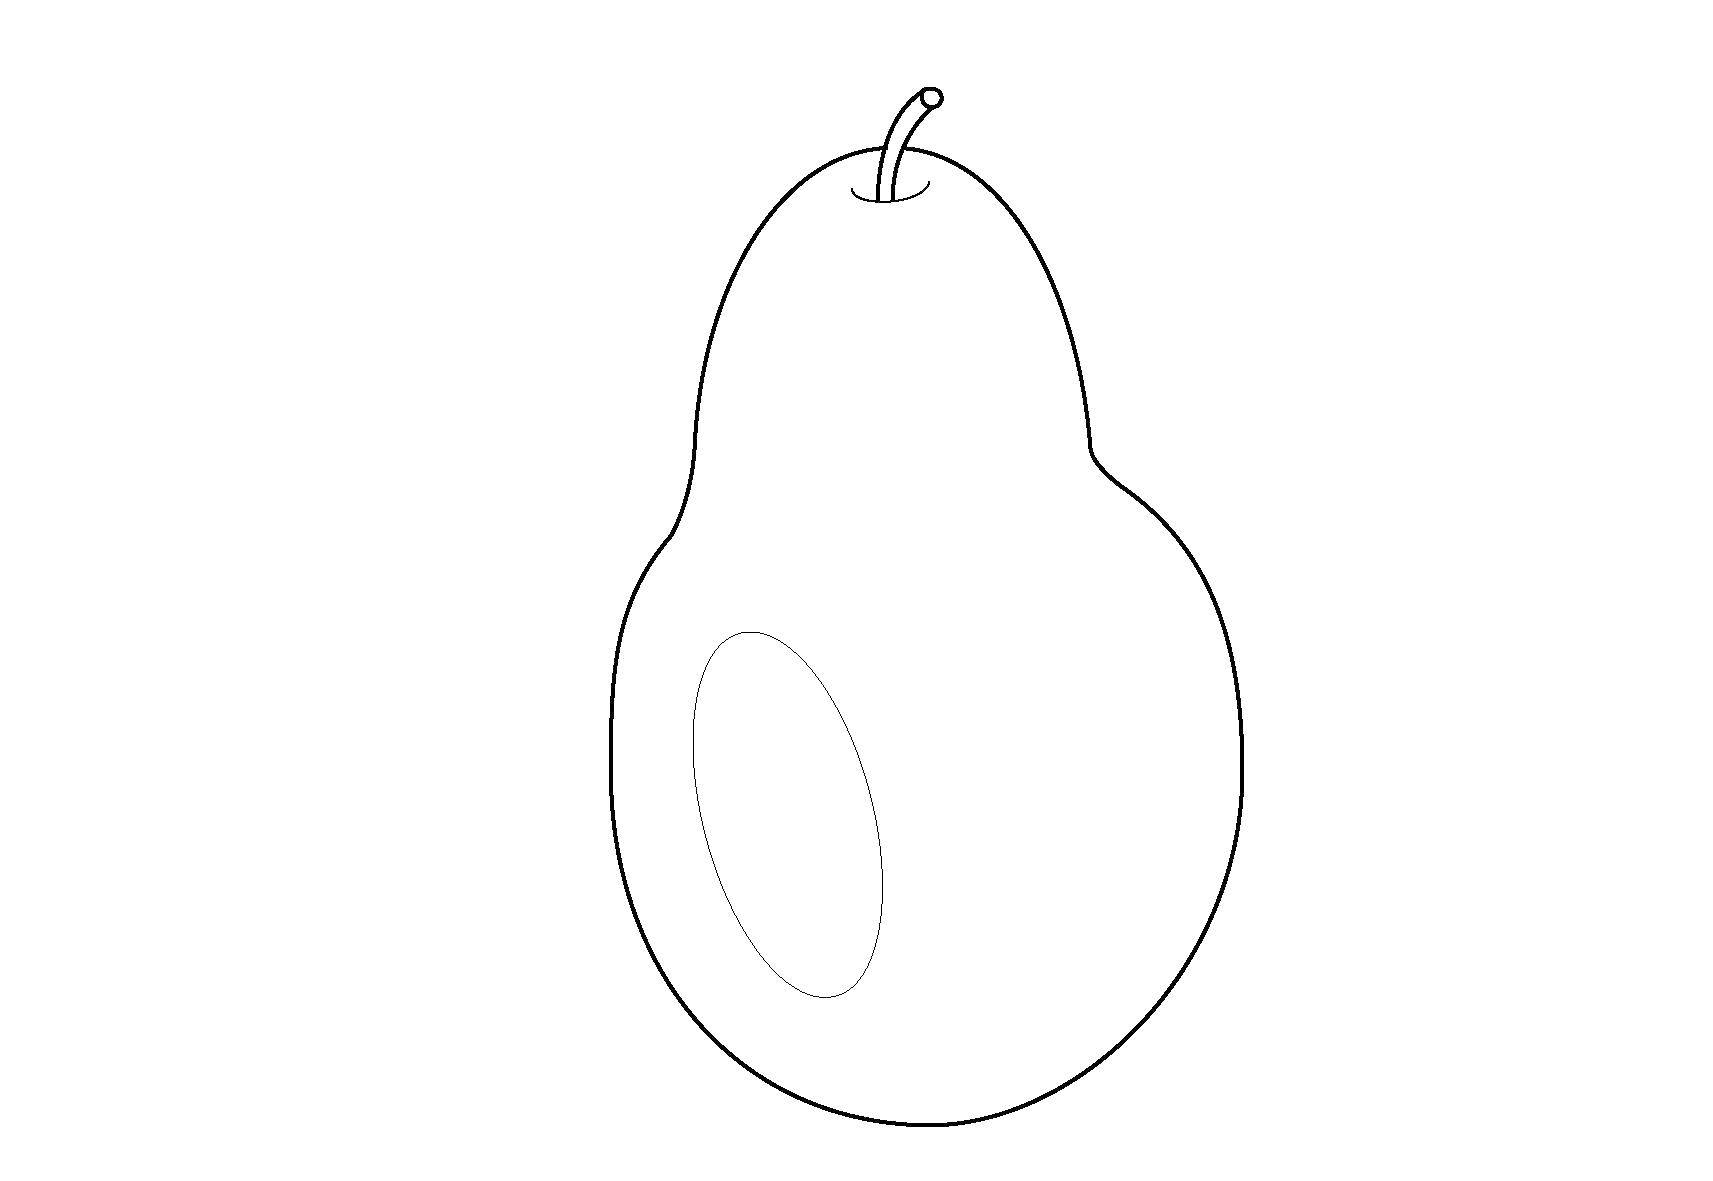 Coloring Pear. Category pear. Tags:  fruits.